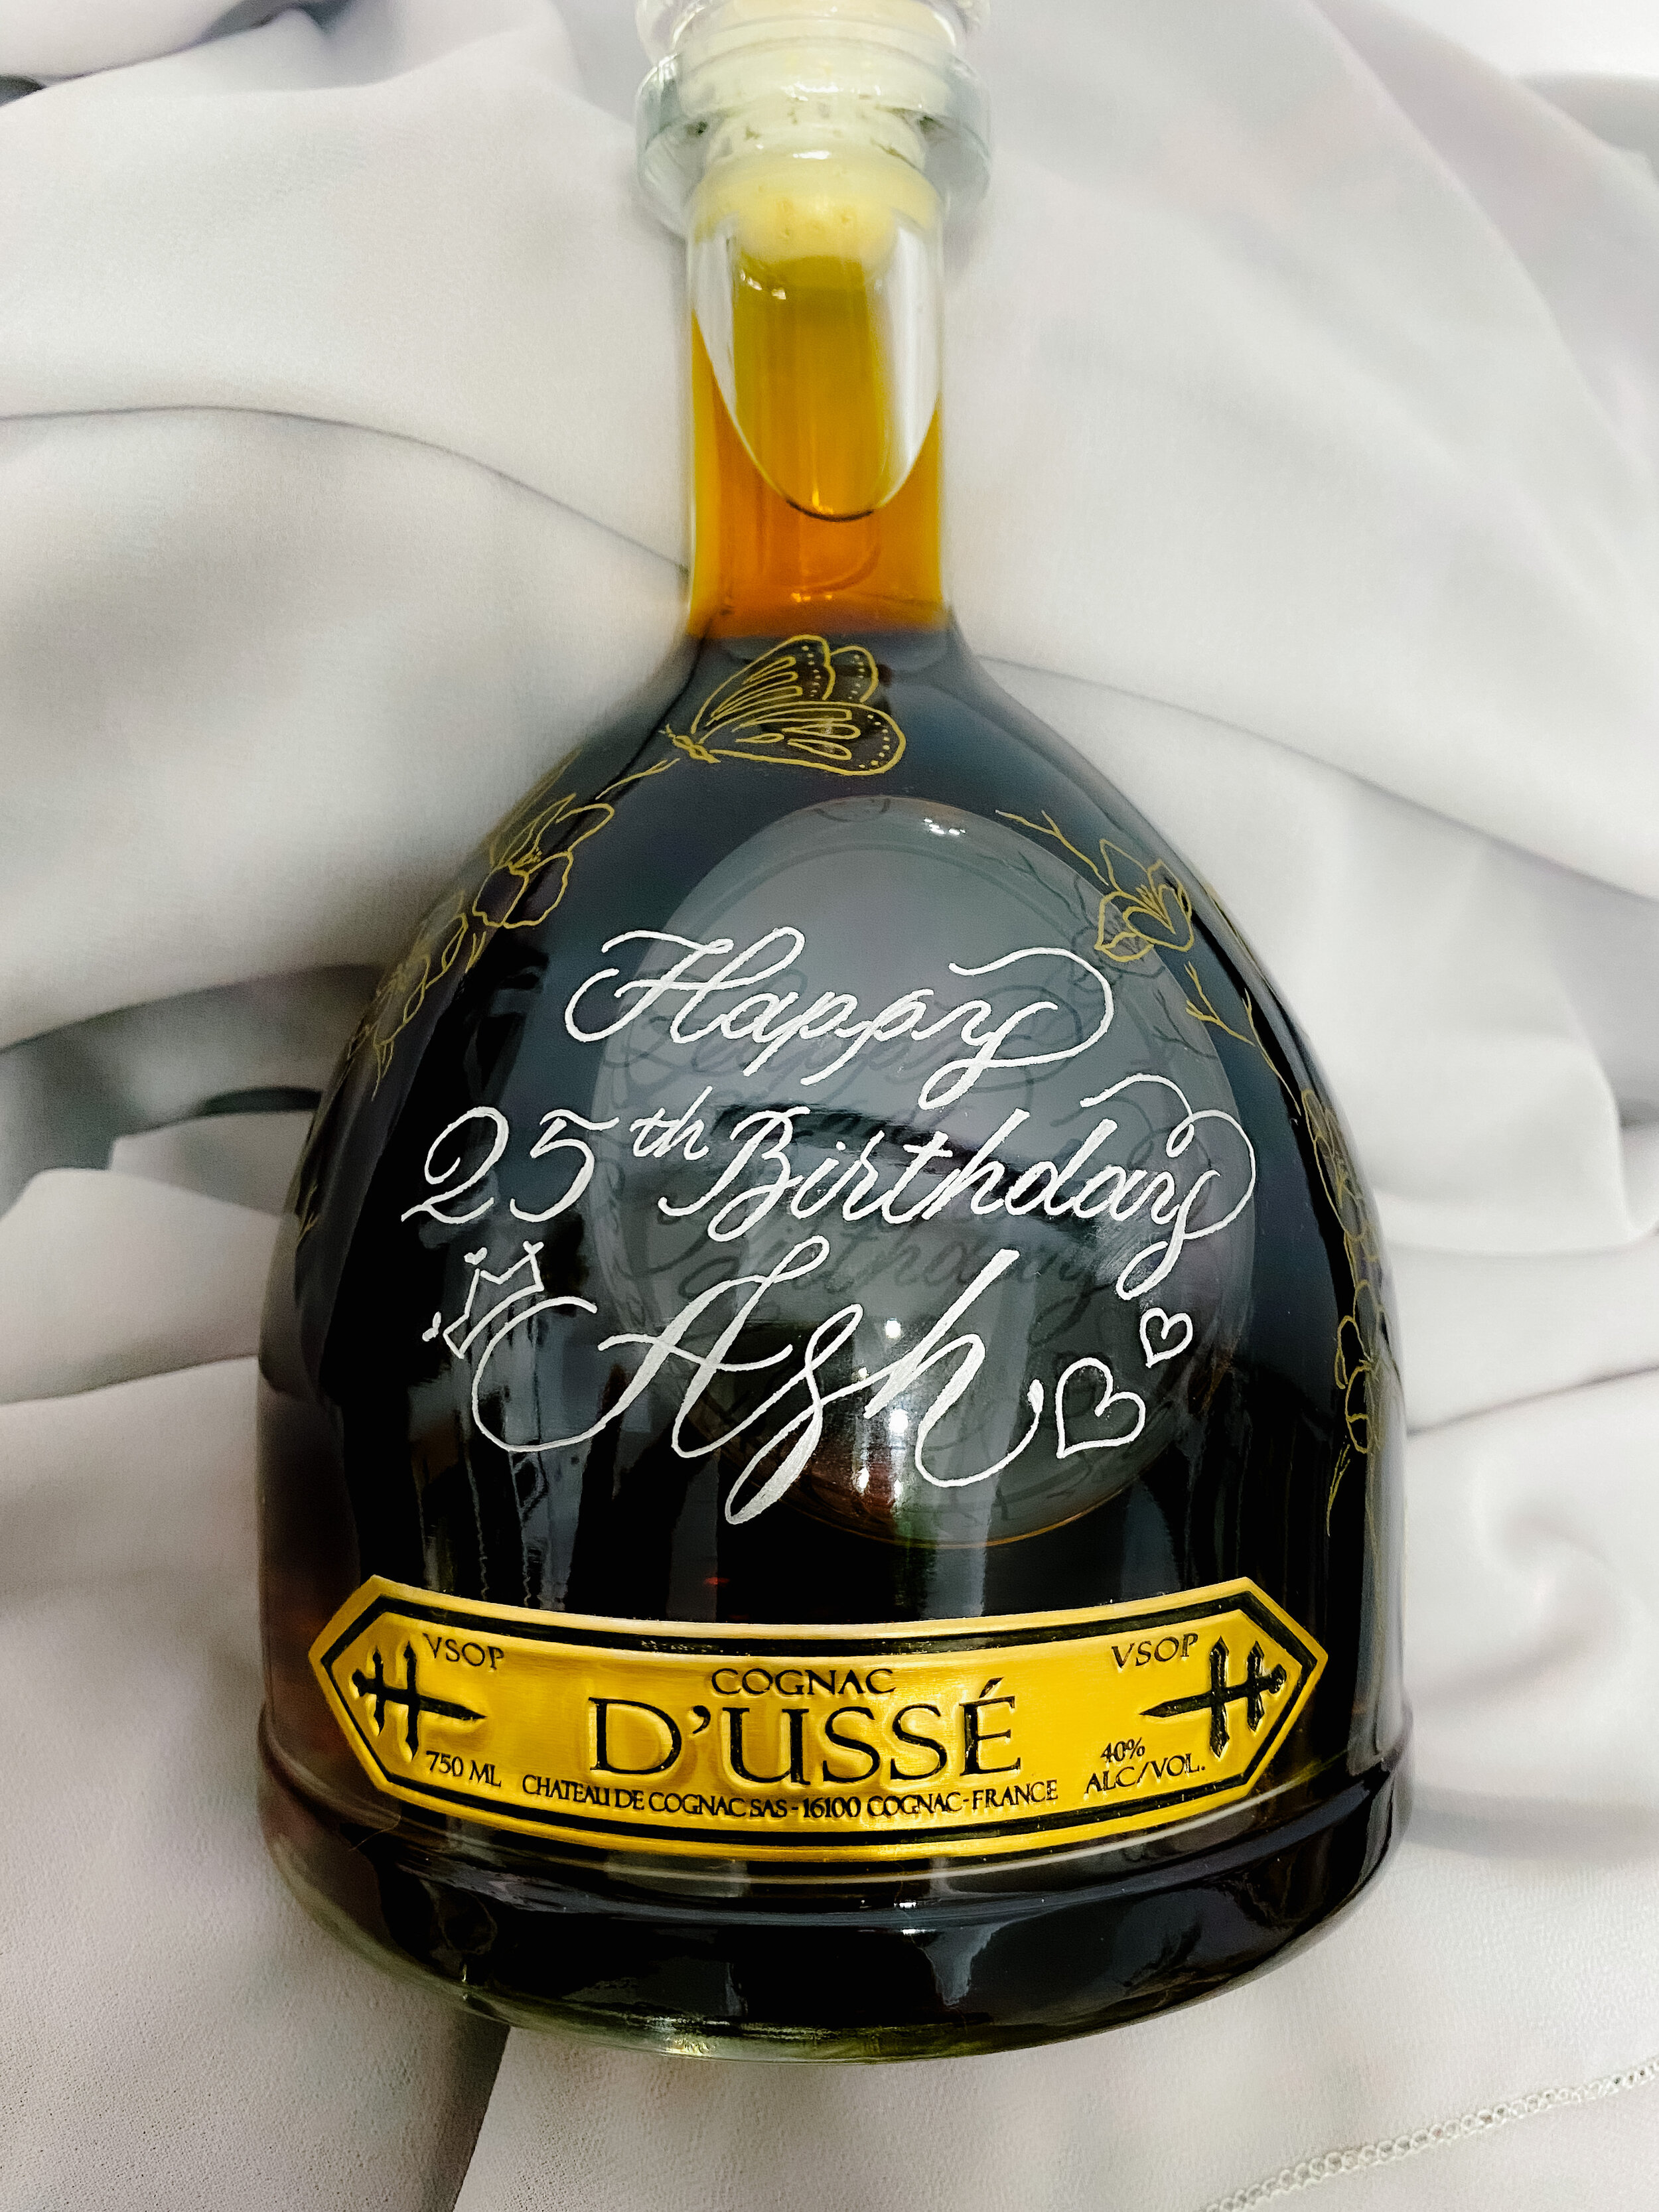 Calligraphy and Illustrative Engraving on a bottle